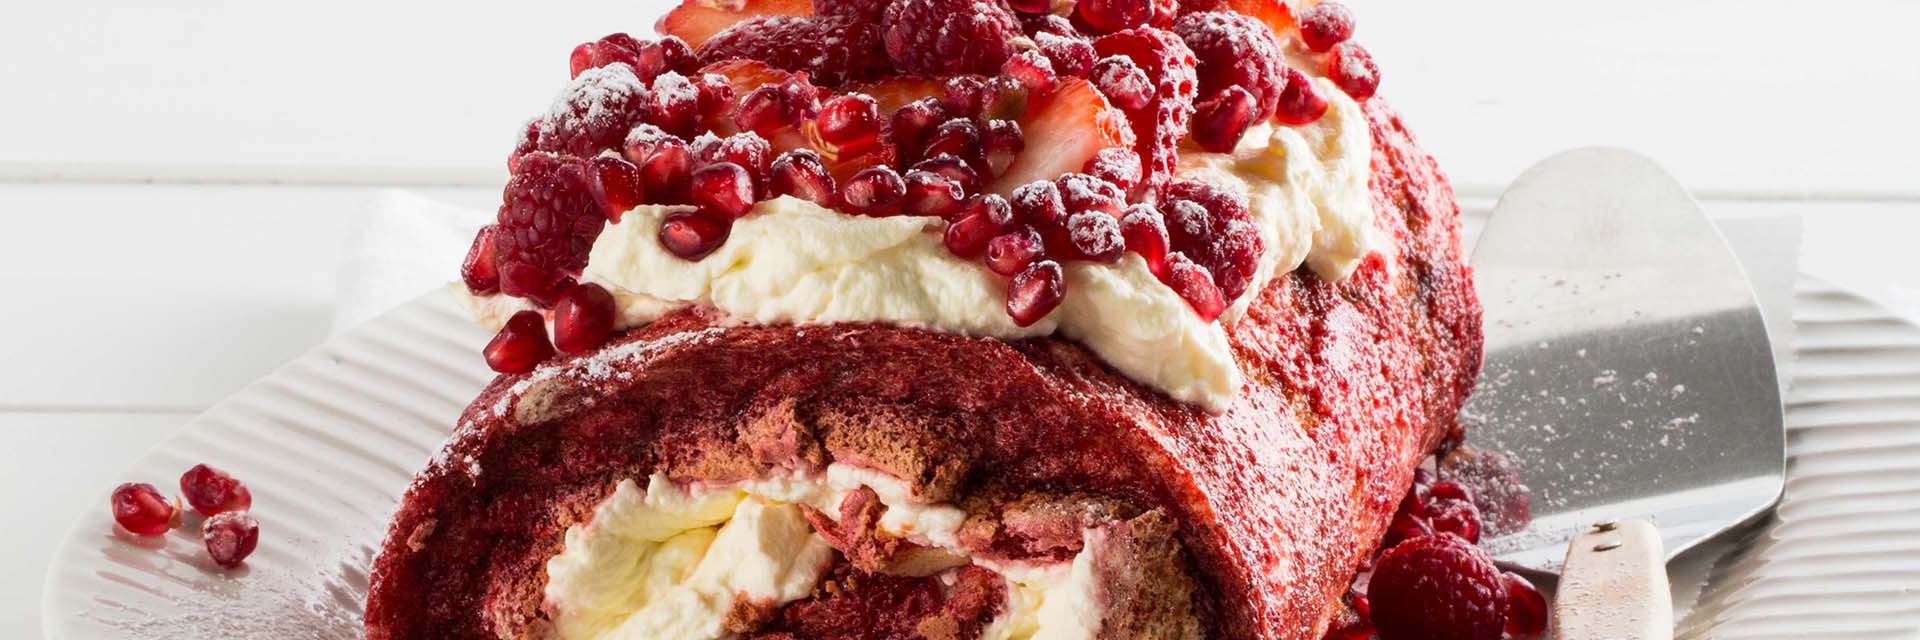 BEETROOT AND BERRY MERINGUE ROULADE WITH WHIPPED CREAM